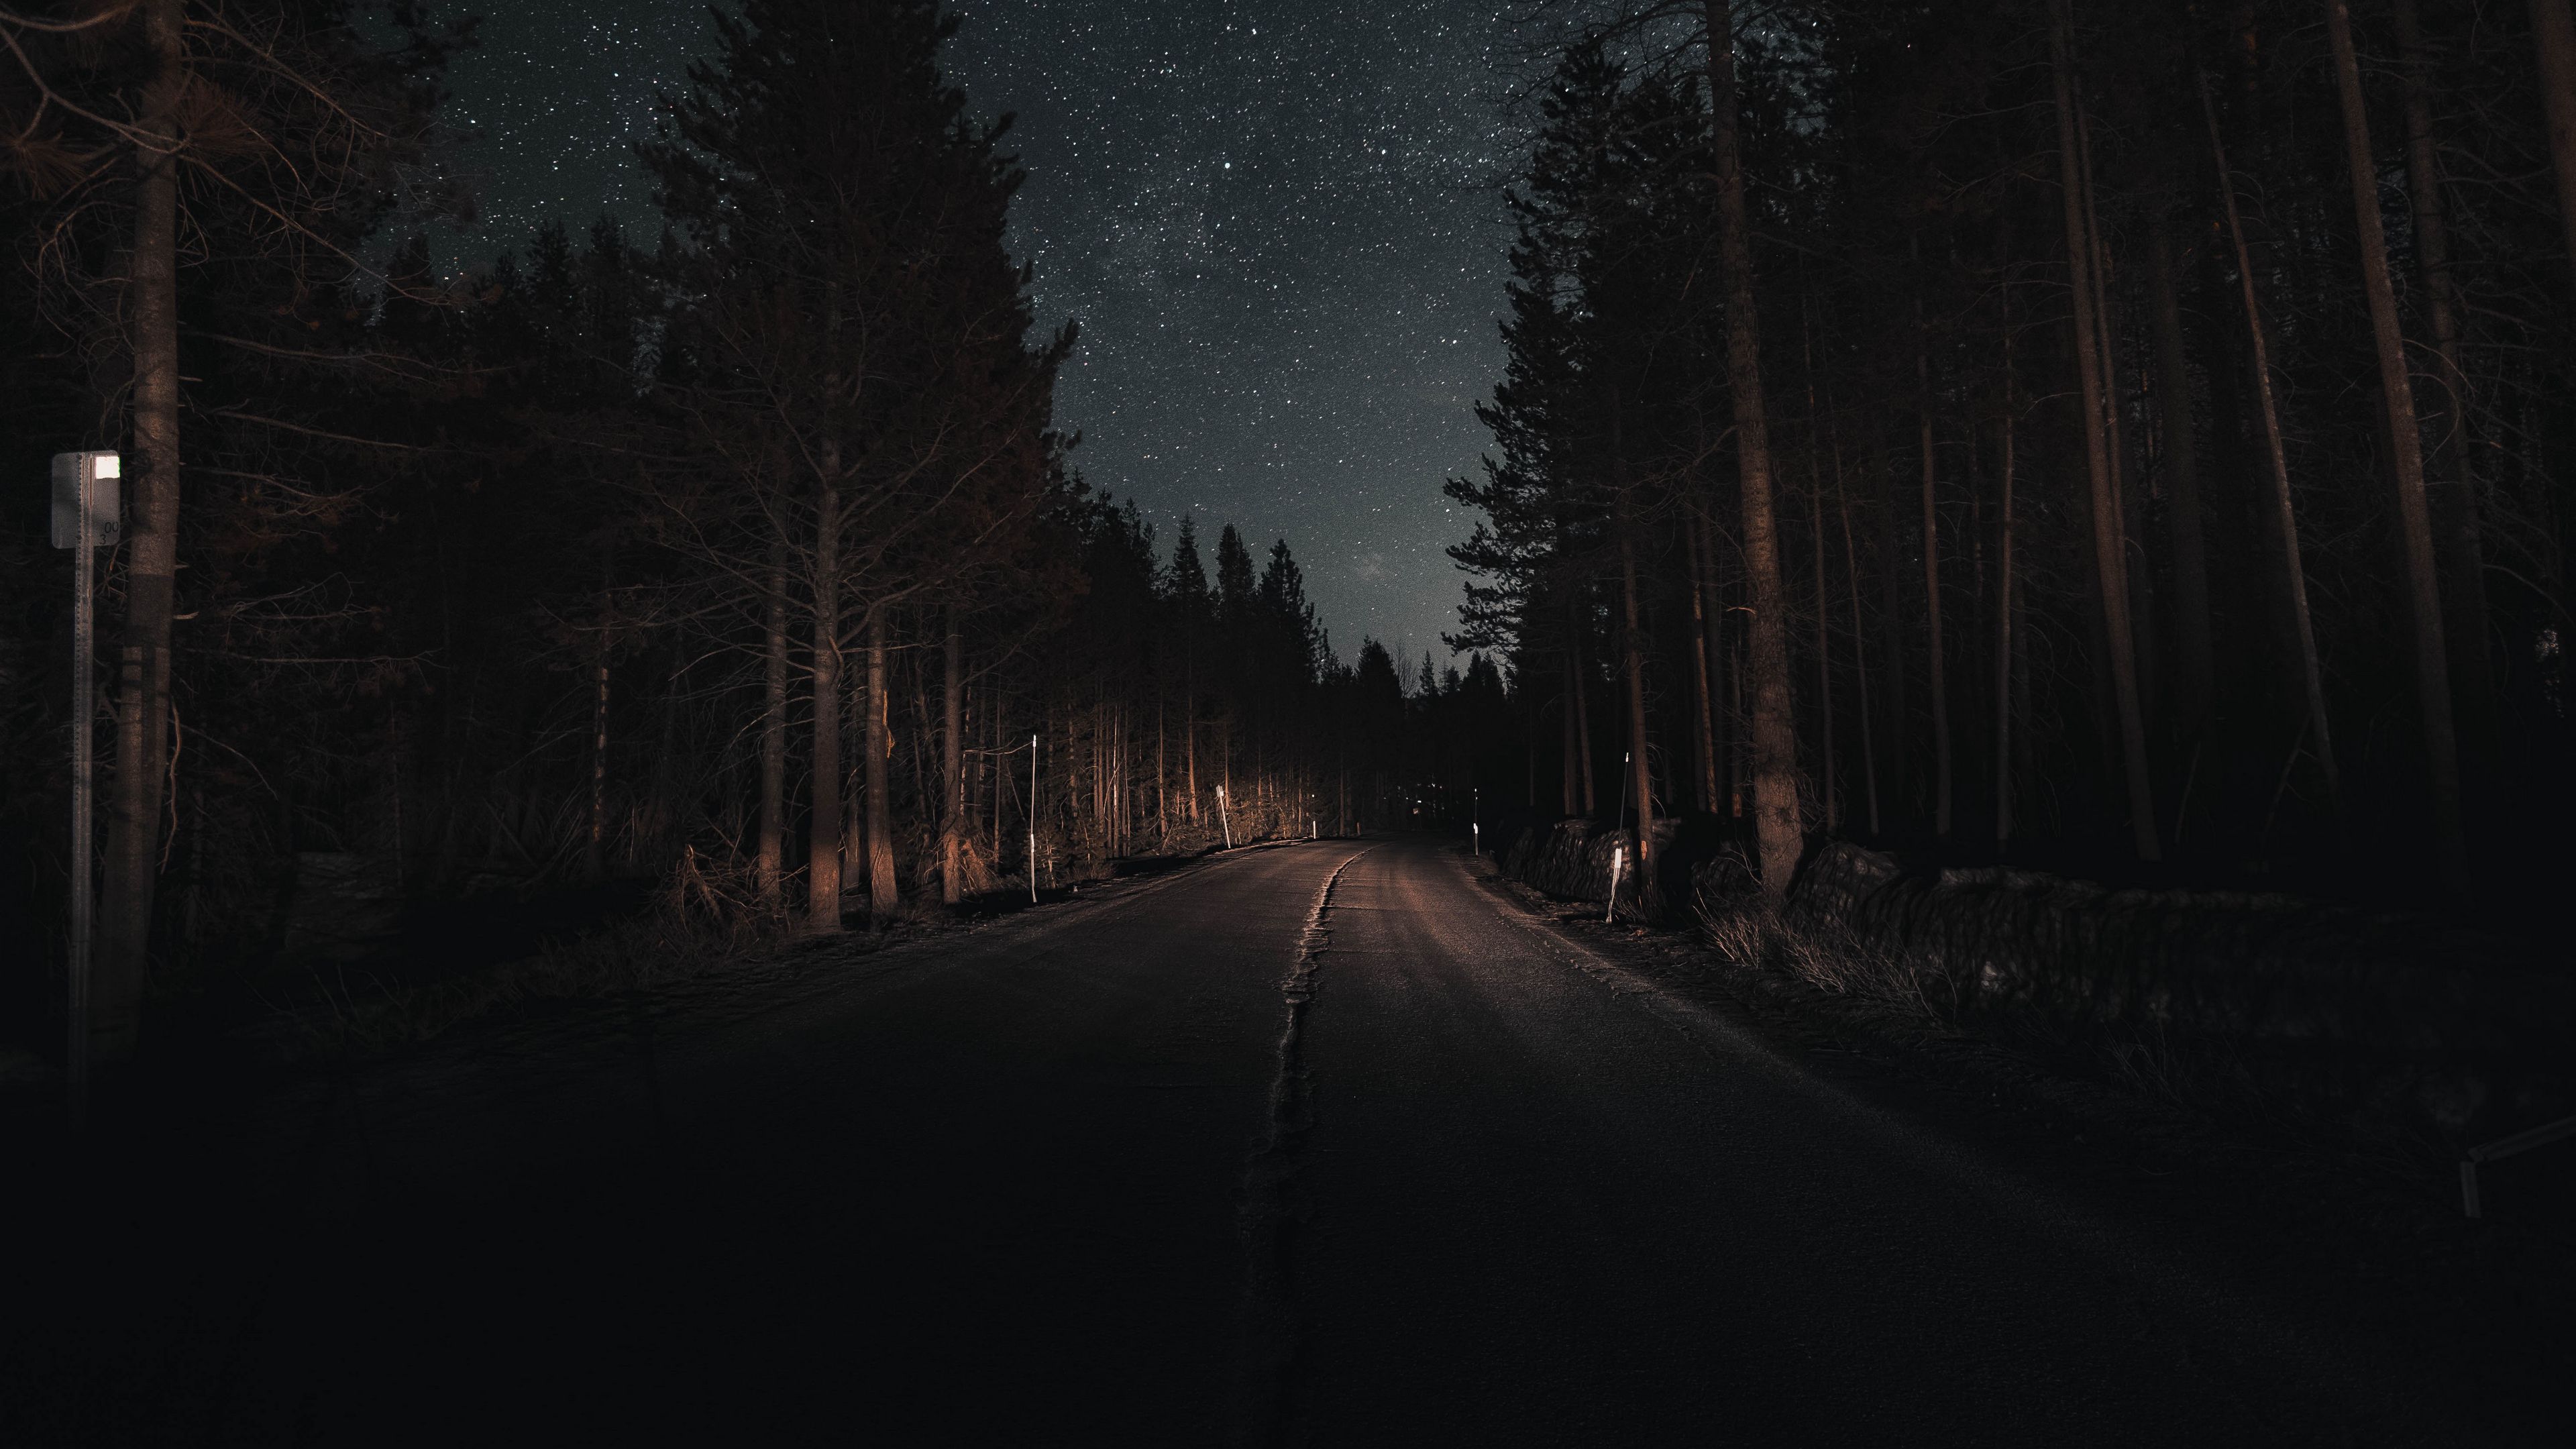 Download wallpaper 3840x2160 road, forest, night, starry sky, turn 4k uhd 16:9 HD background